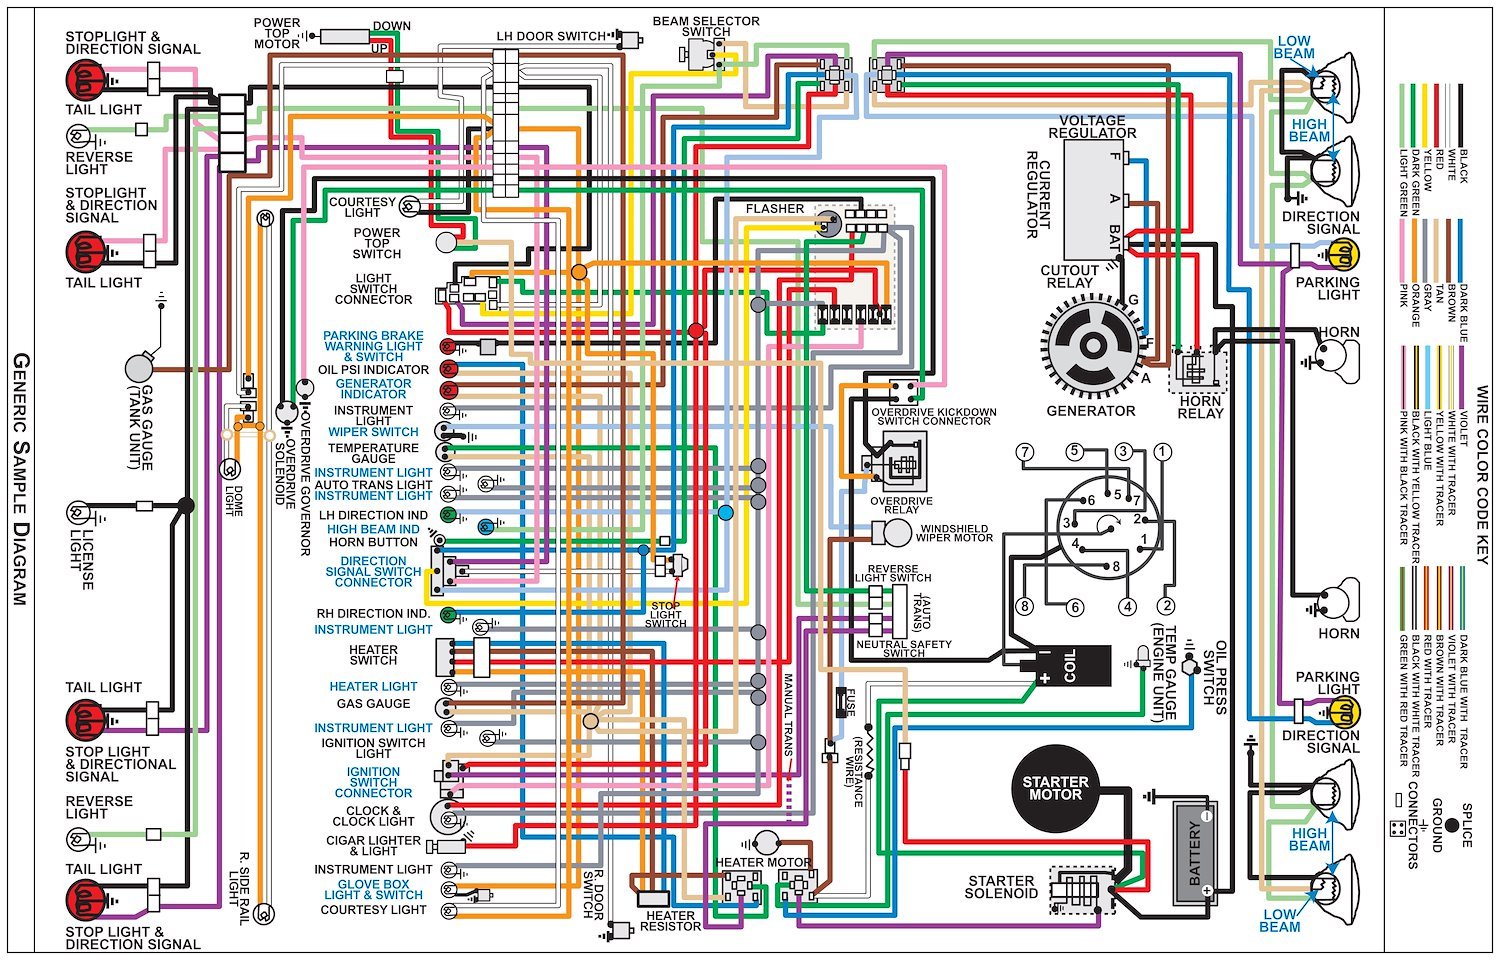 Wiring Diagram for 1975 Ford F-Series Truck, 11 in x 17 in., Laminated